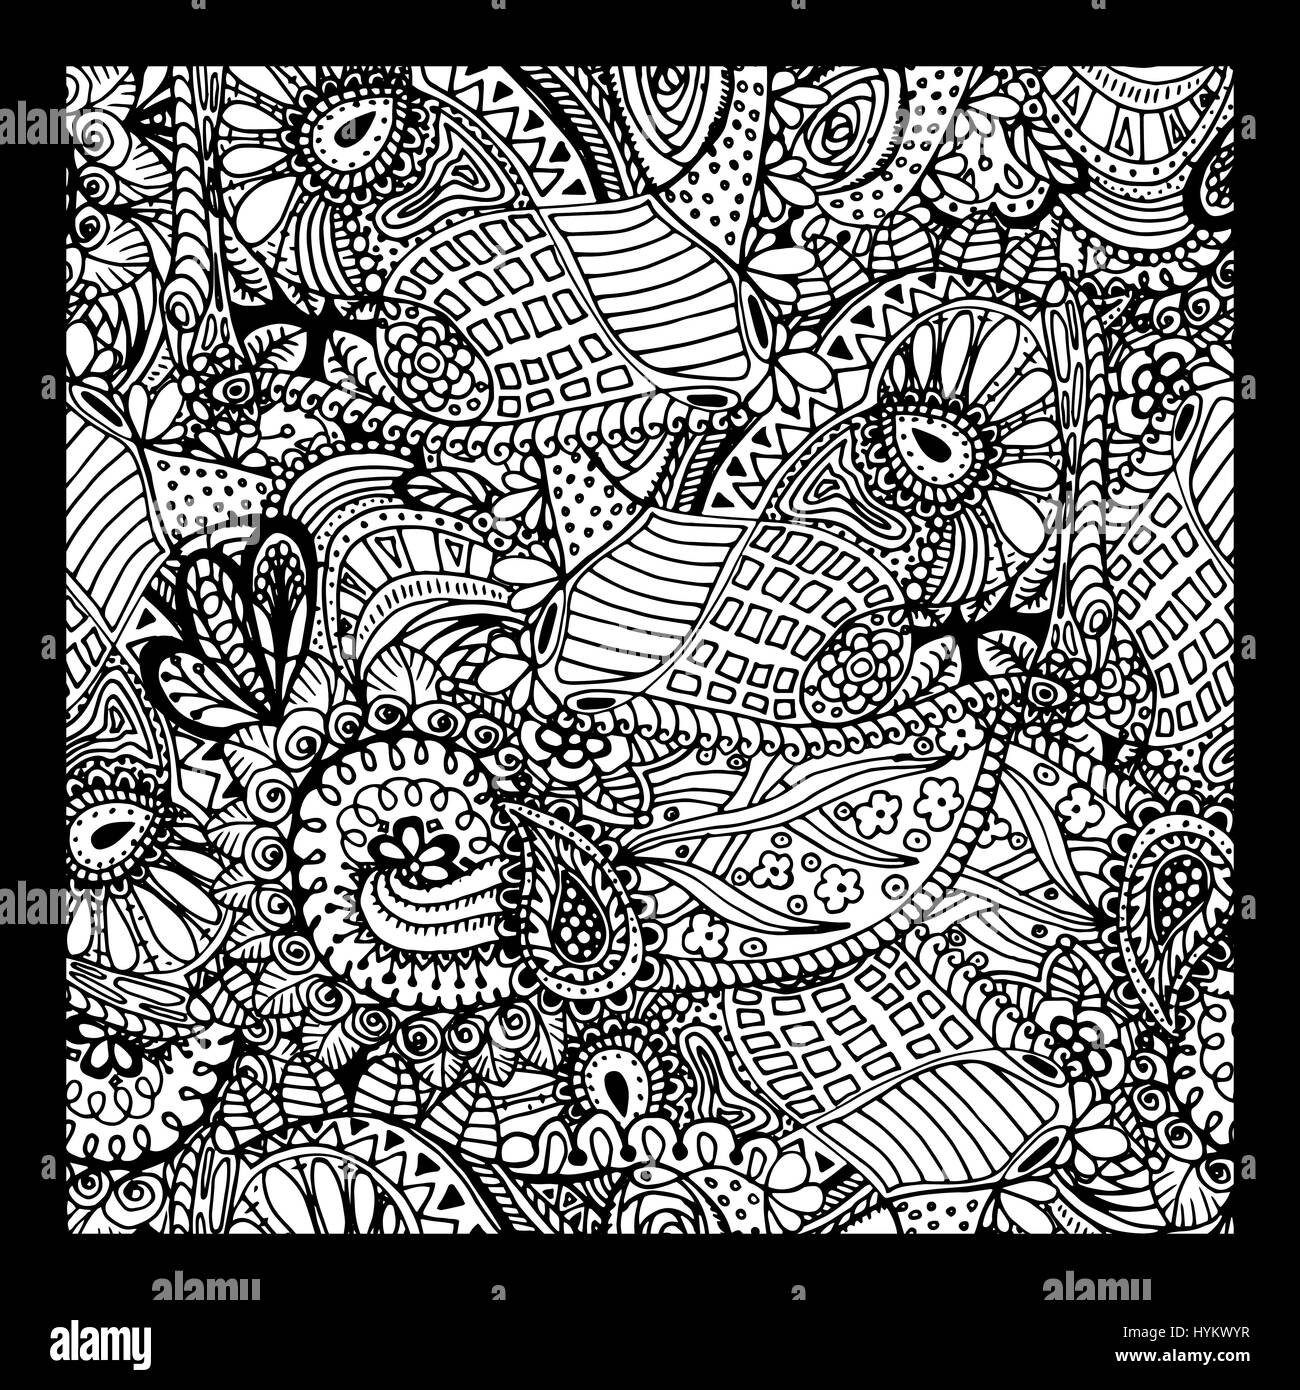 Black vector mono color illustration. Adult Coloring book page design, for adults. Stock Vector